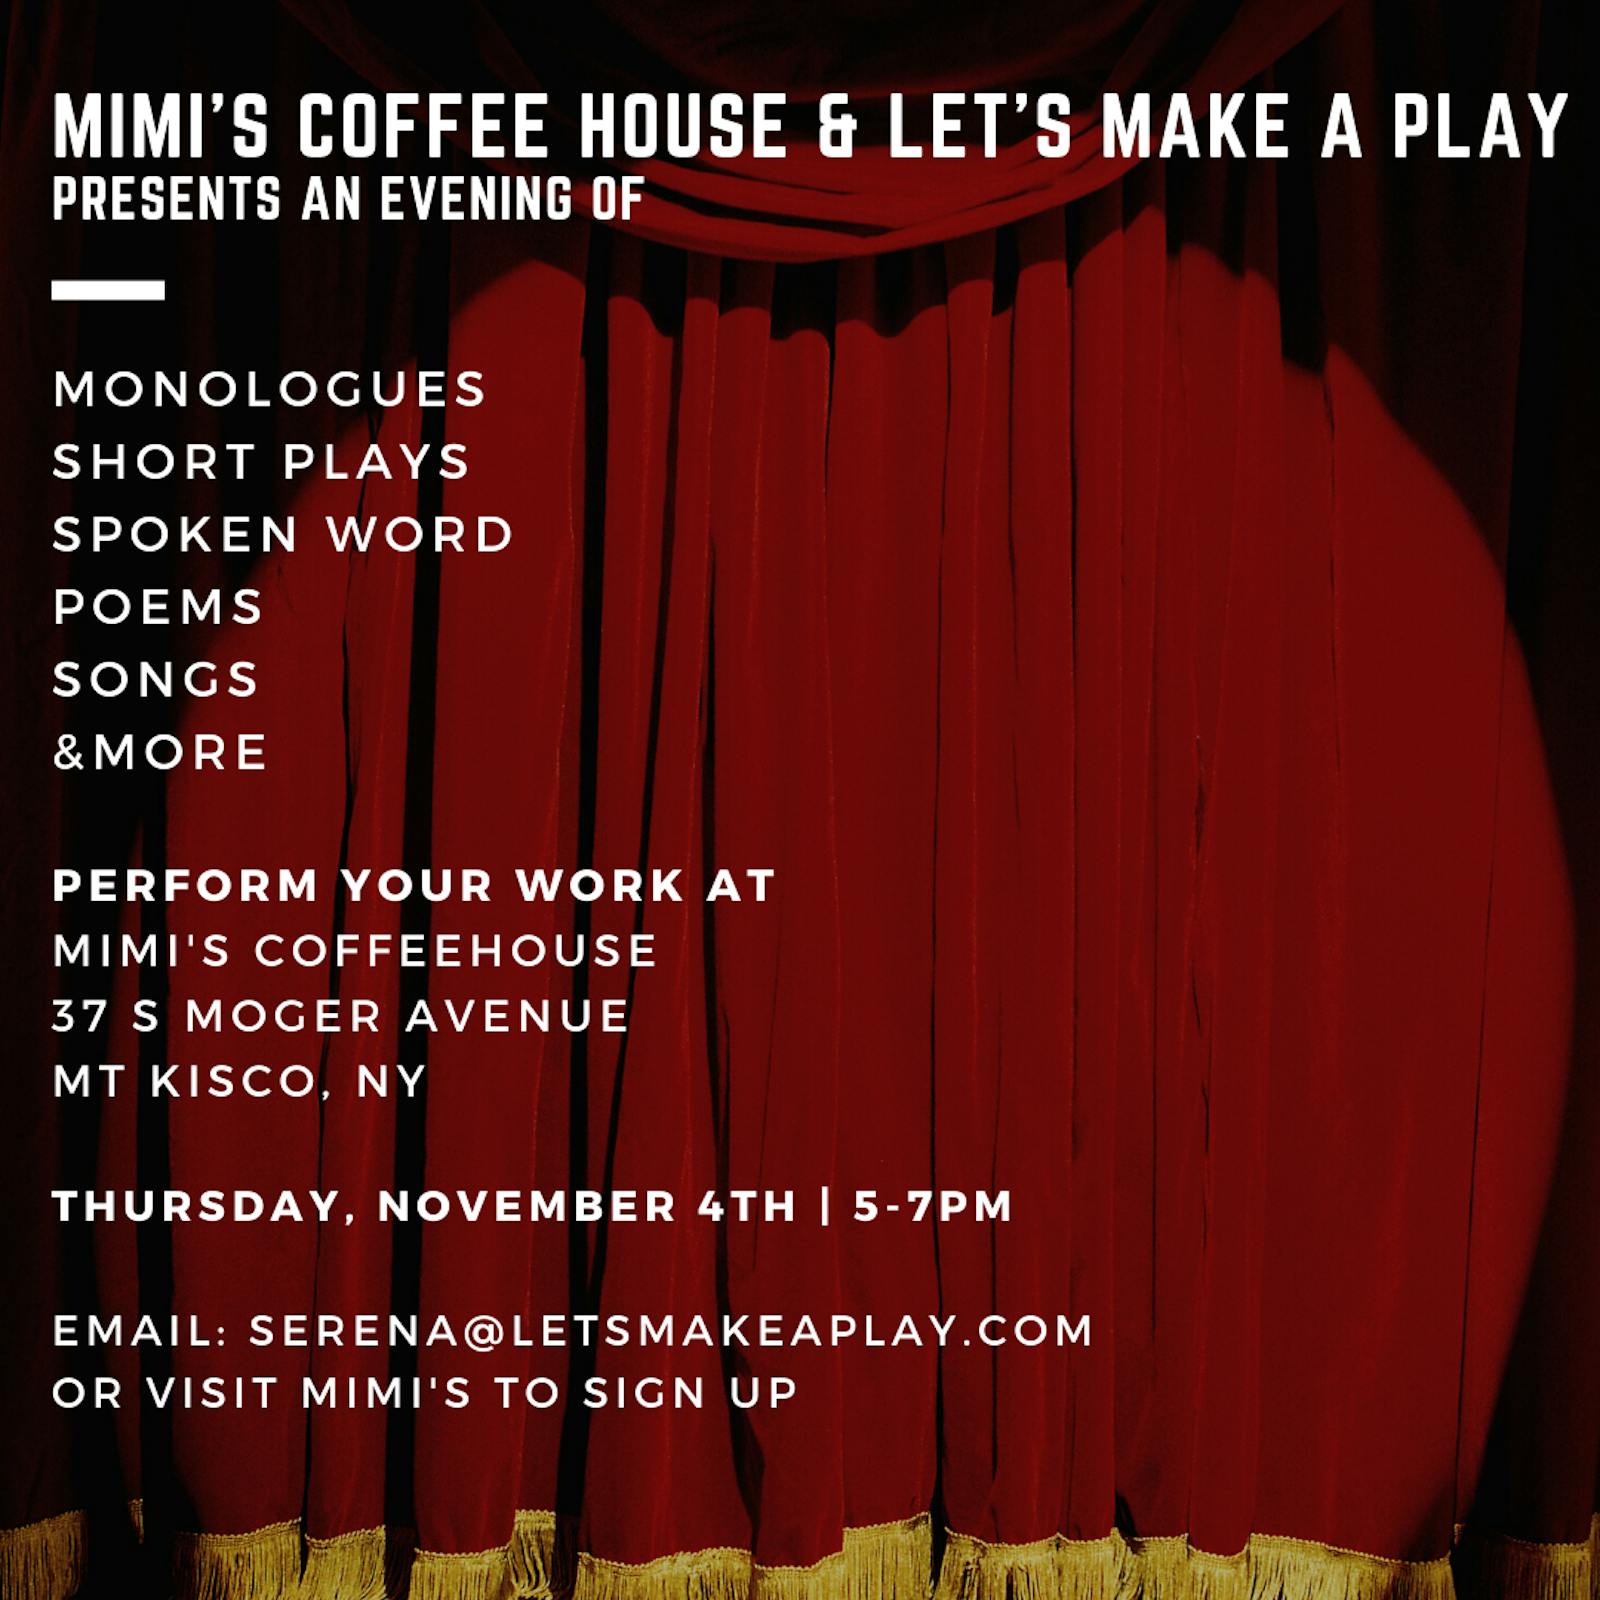 Theatre Night at Mimi's Coffee House in #MountKisco